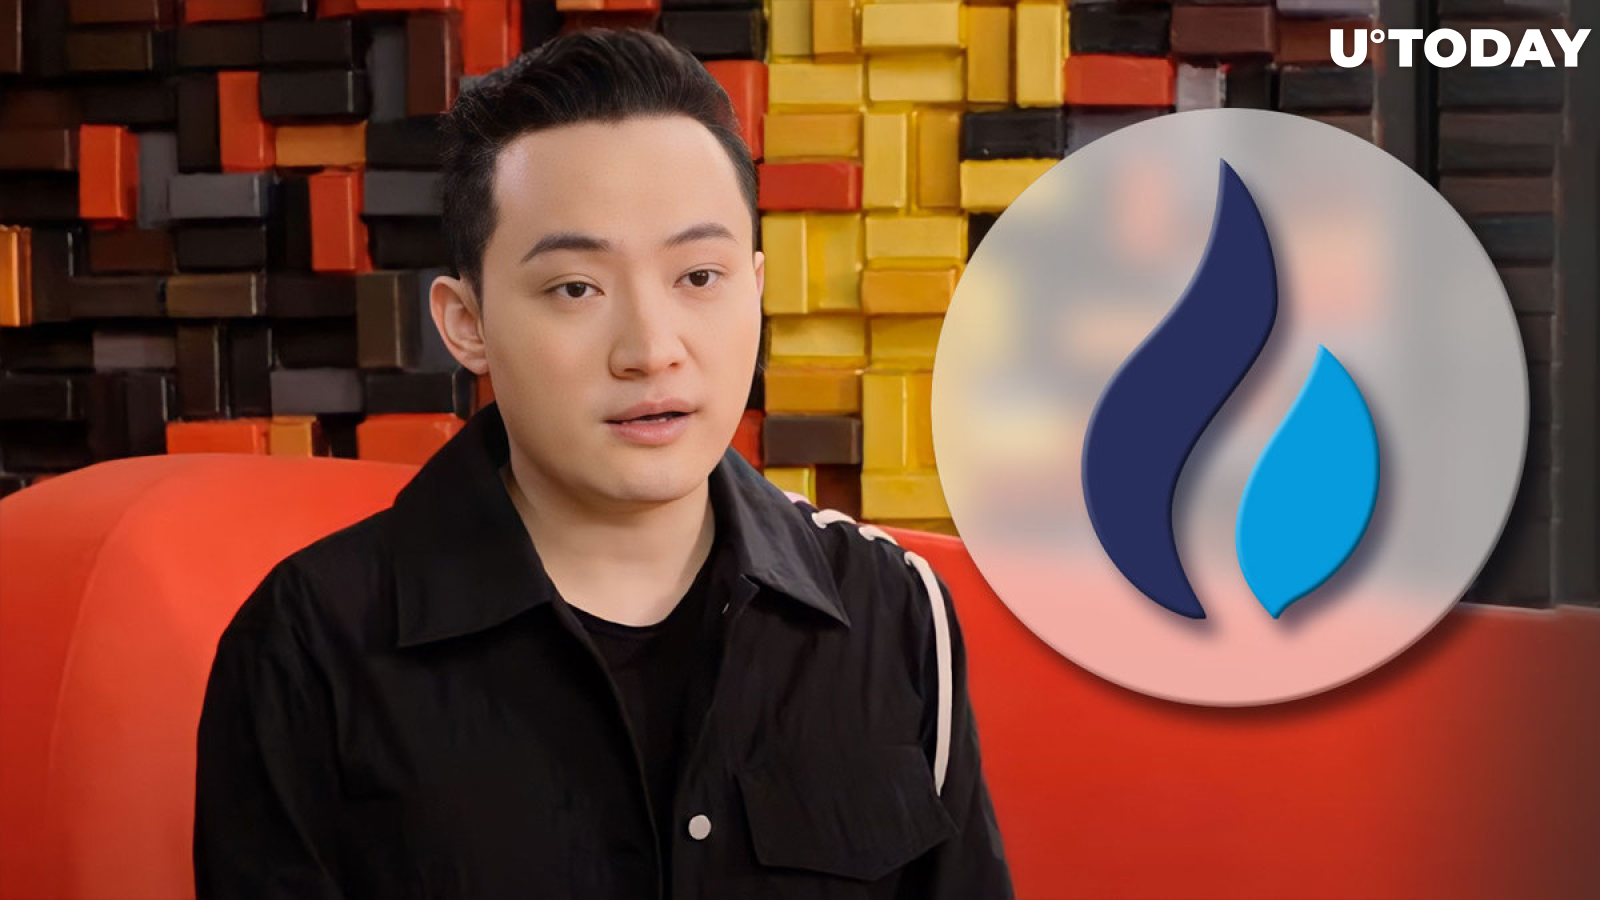 Huobi Token (HT) Price Spikes by 21% After Justin Sun Reportedly Purchased Exchange